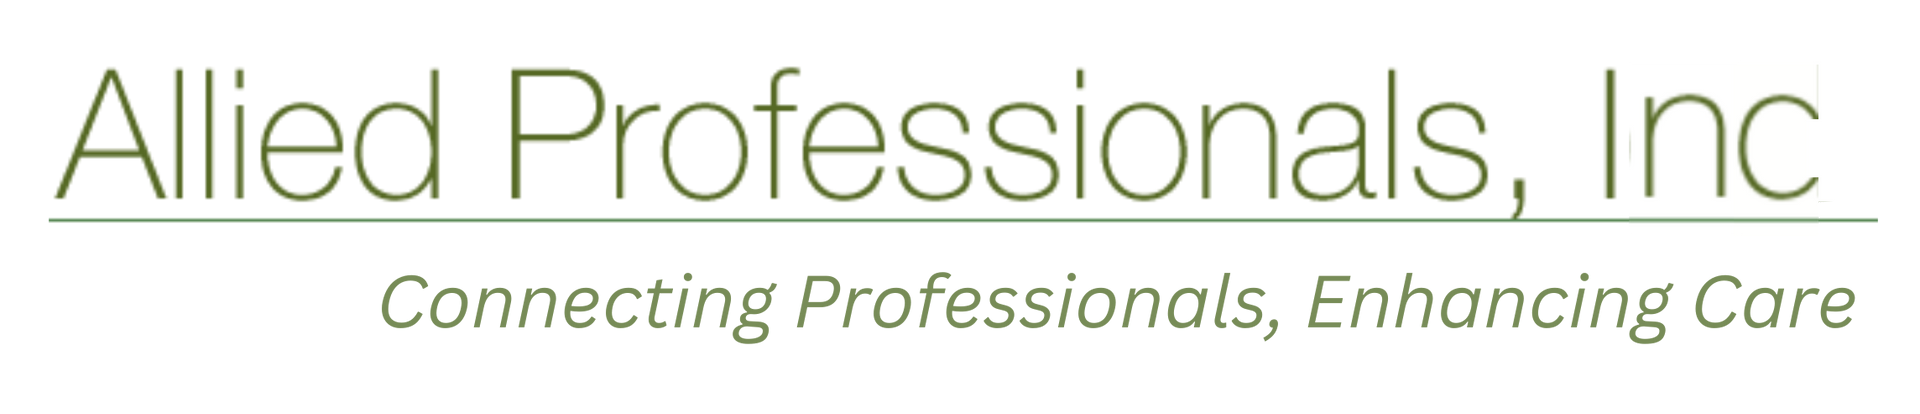 Allied Professionals